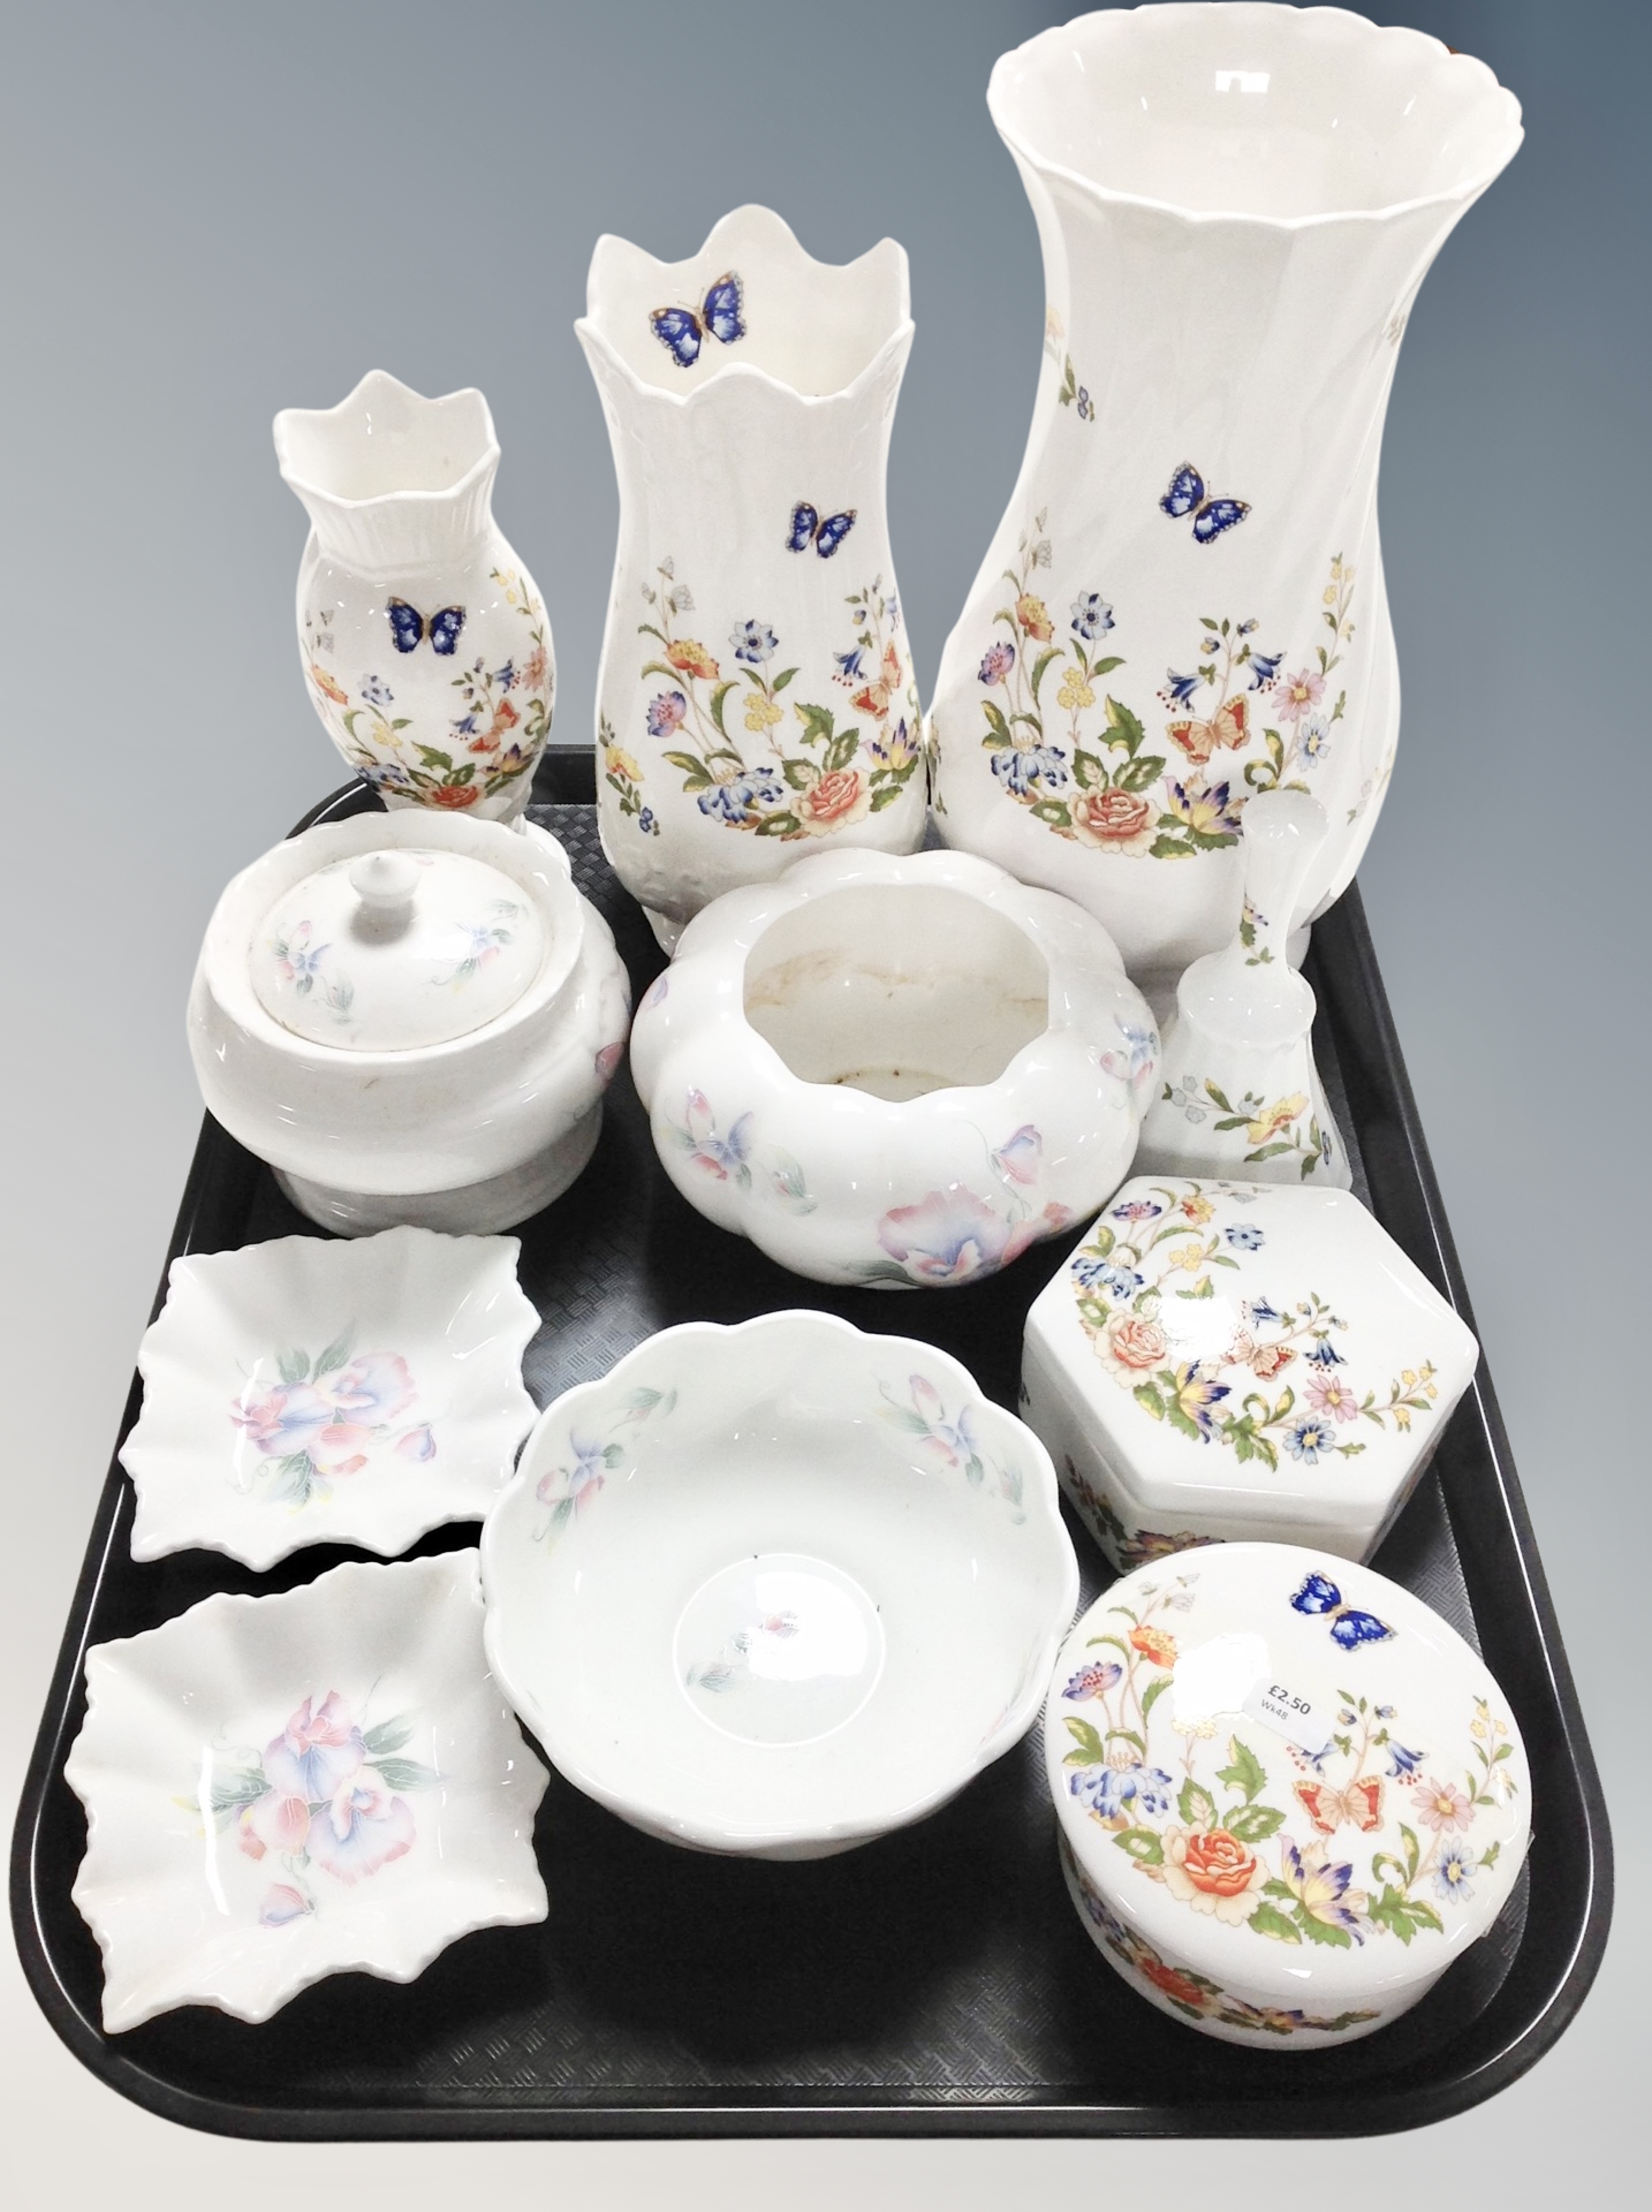 Eleven pieces of Aynsley Sweet heart and Cottage garden porcelain